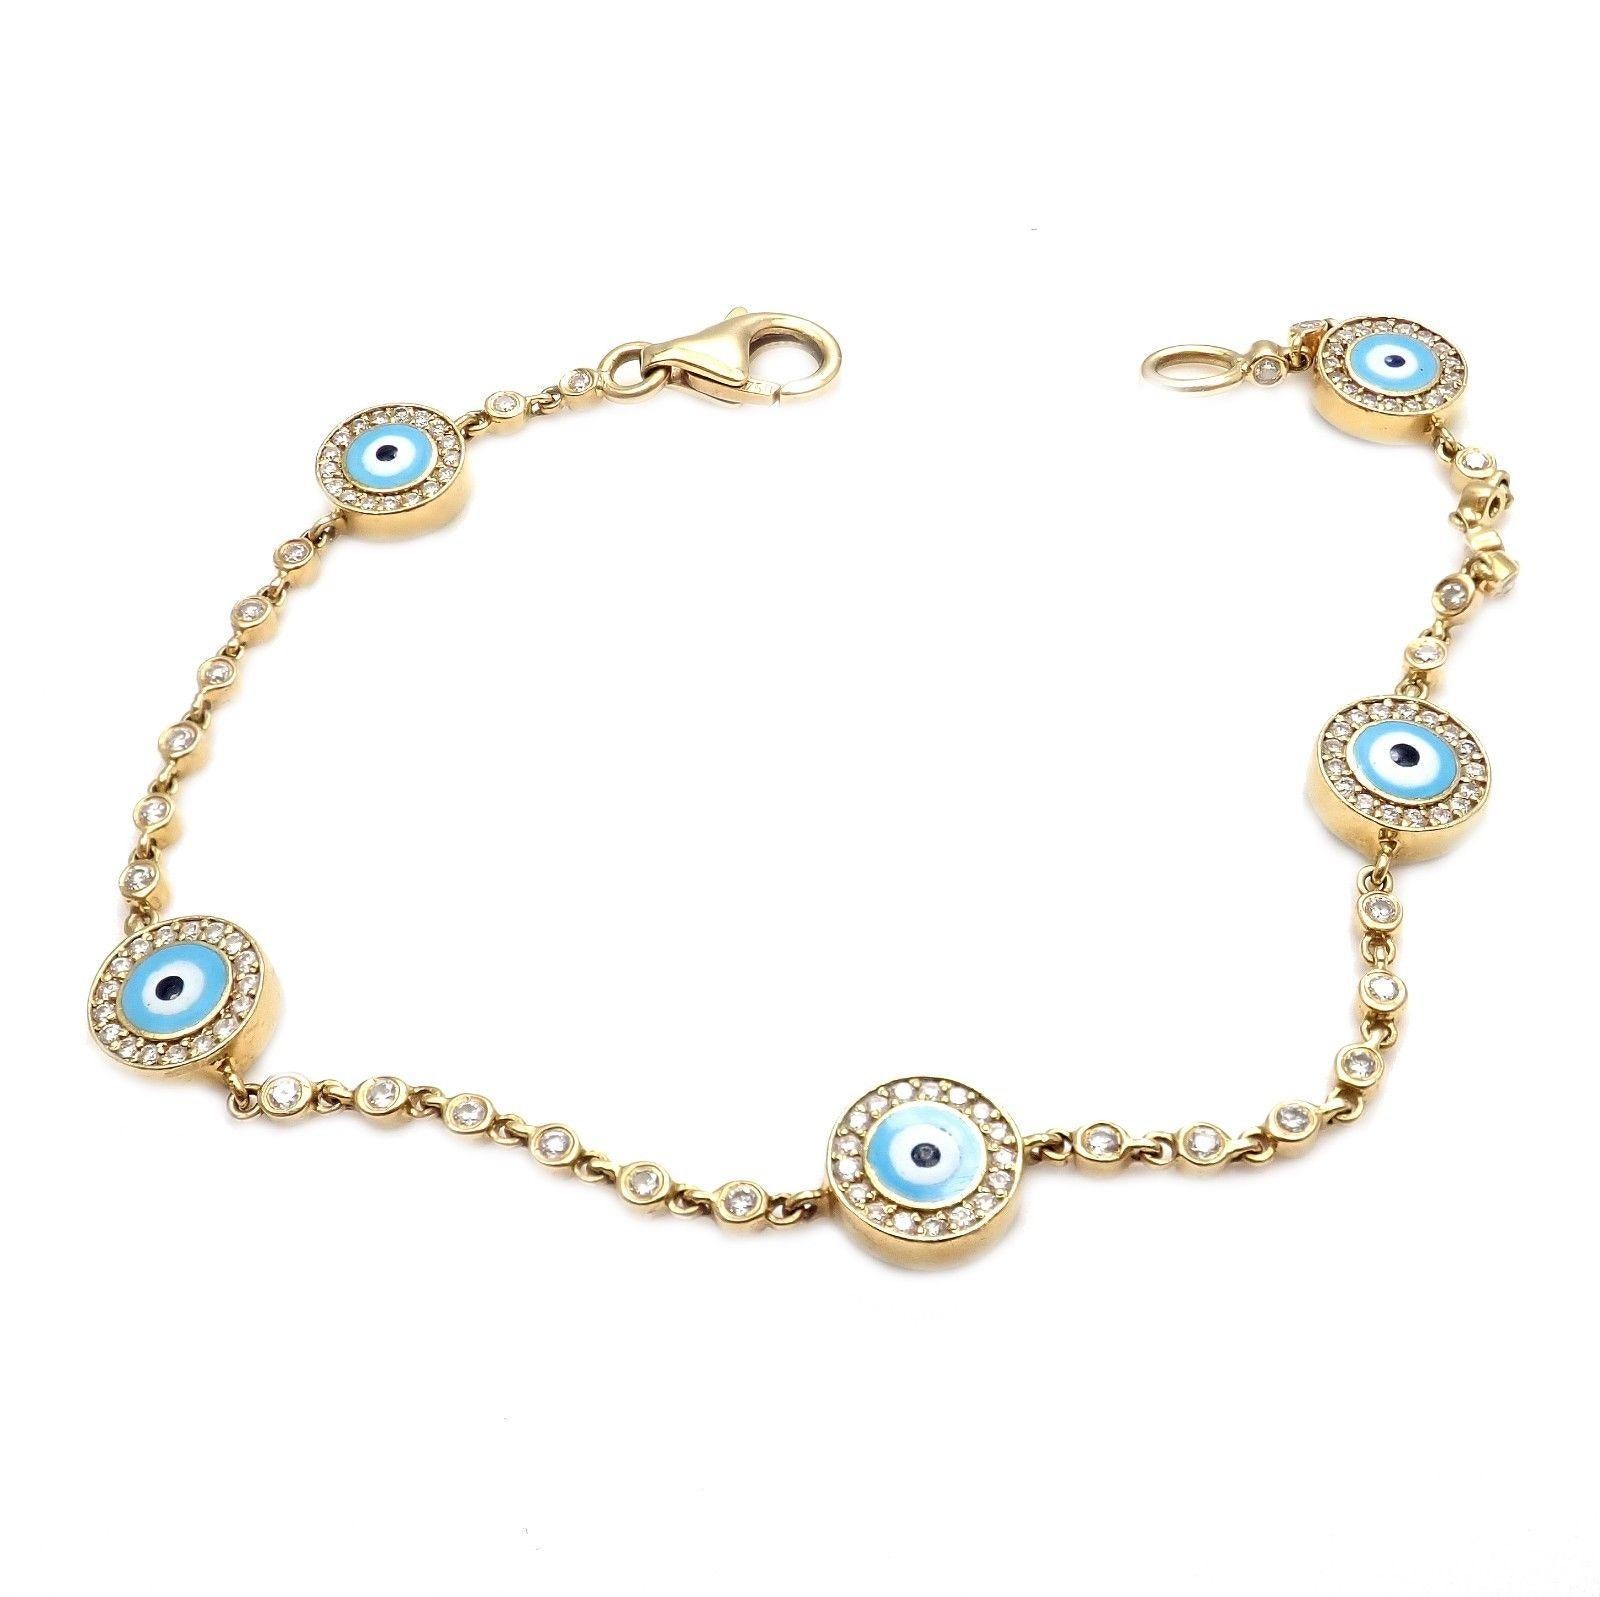 18k Yellow Gold Diamond Station Evil Eye Bracelet by Aaron Basha. 
With 113 Diamonds VS1 clarity, G color total weight approximately 0.60ctw
Retail Price: $6,900
Details: 
Length: Length: Fits 6.75